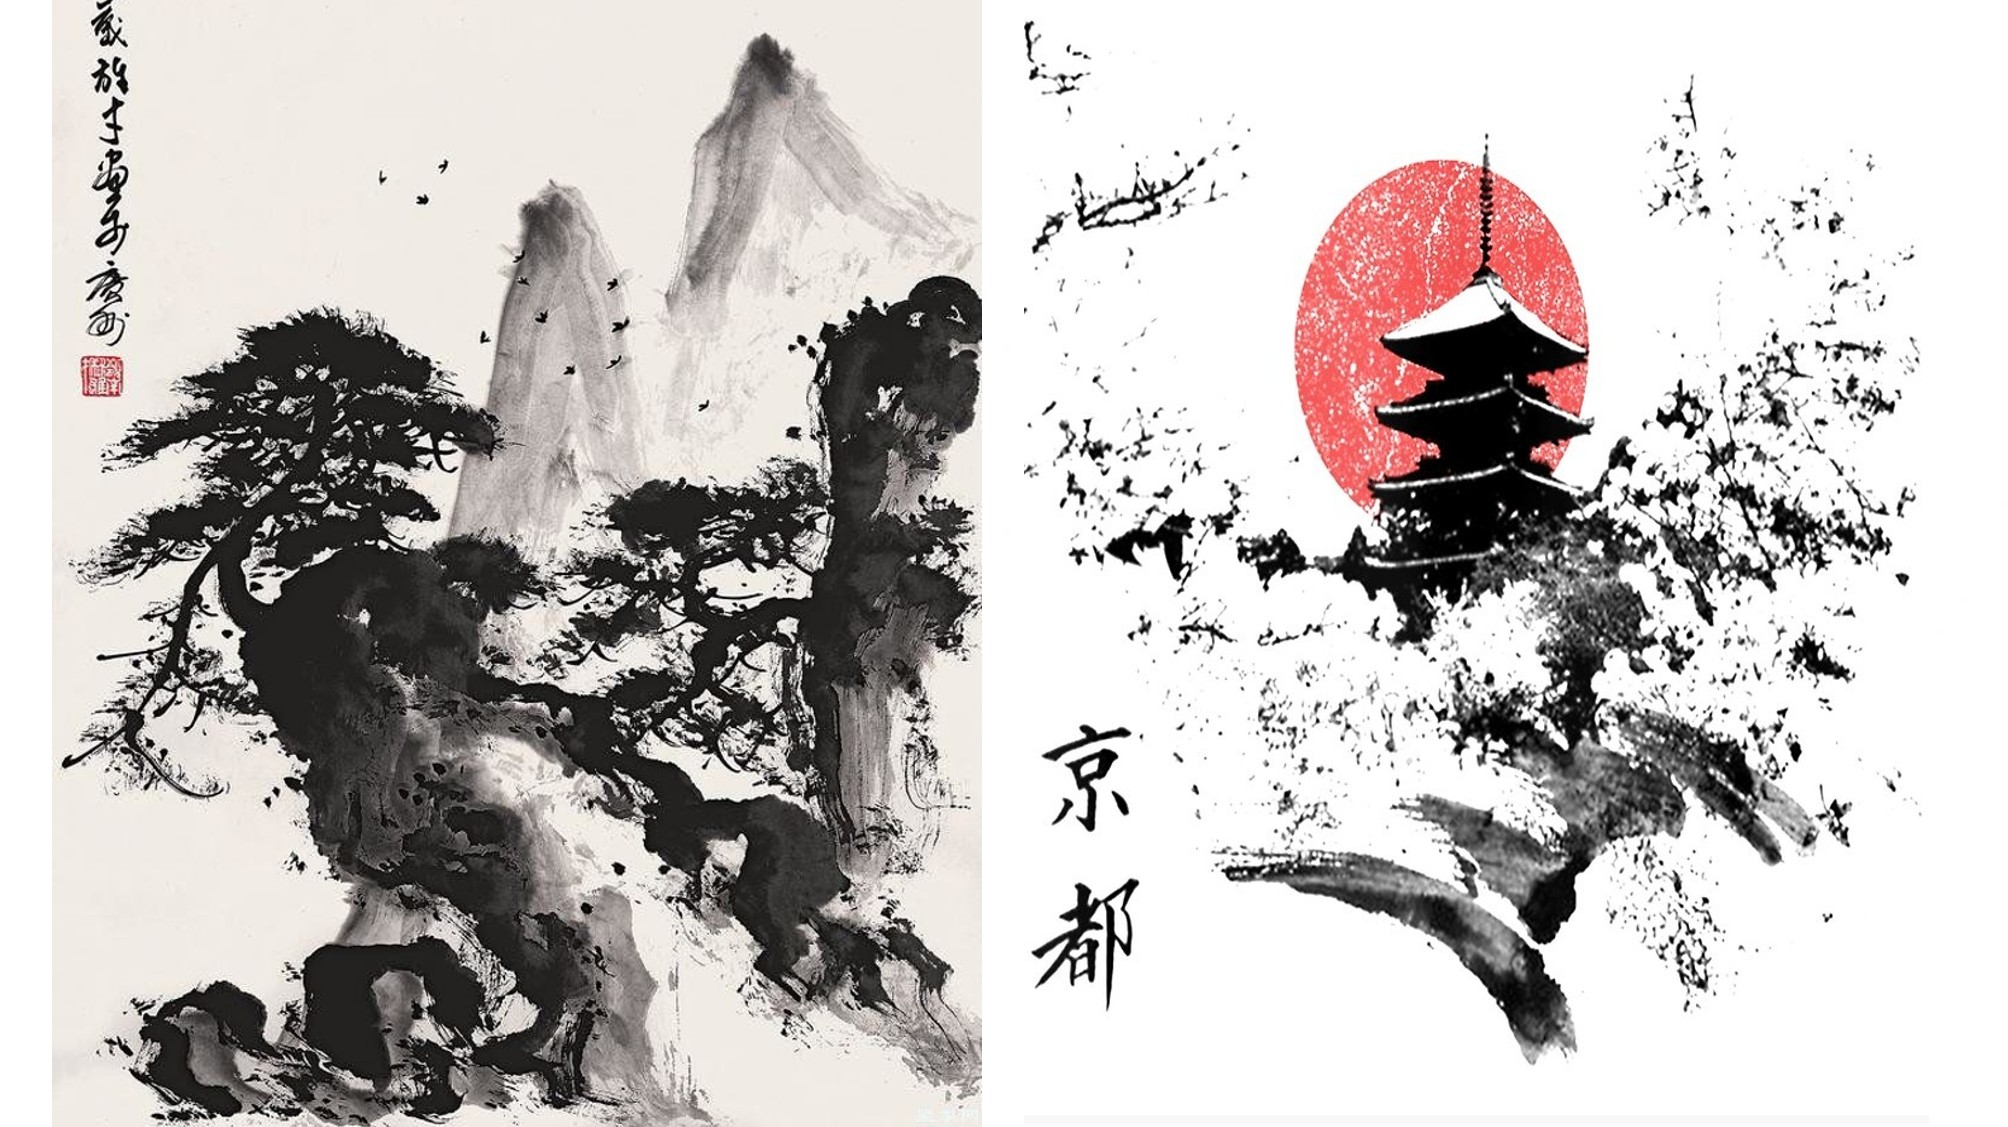 Asian art- A traditional way to introduce Chinese & Japanese culture!